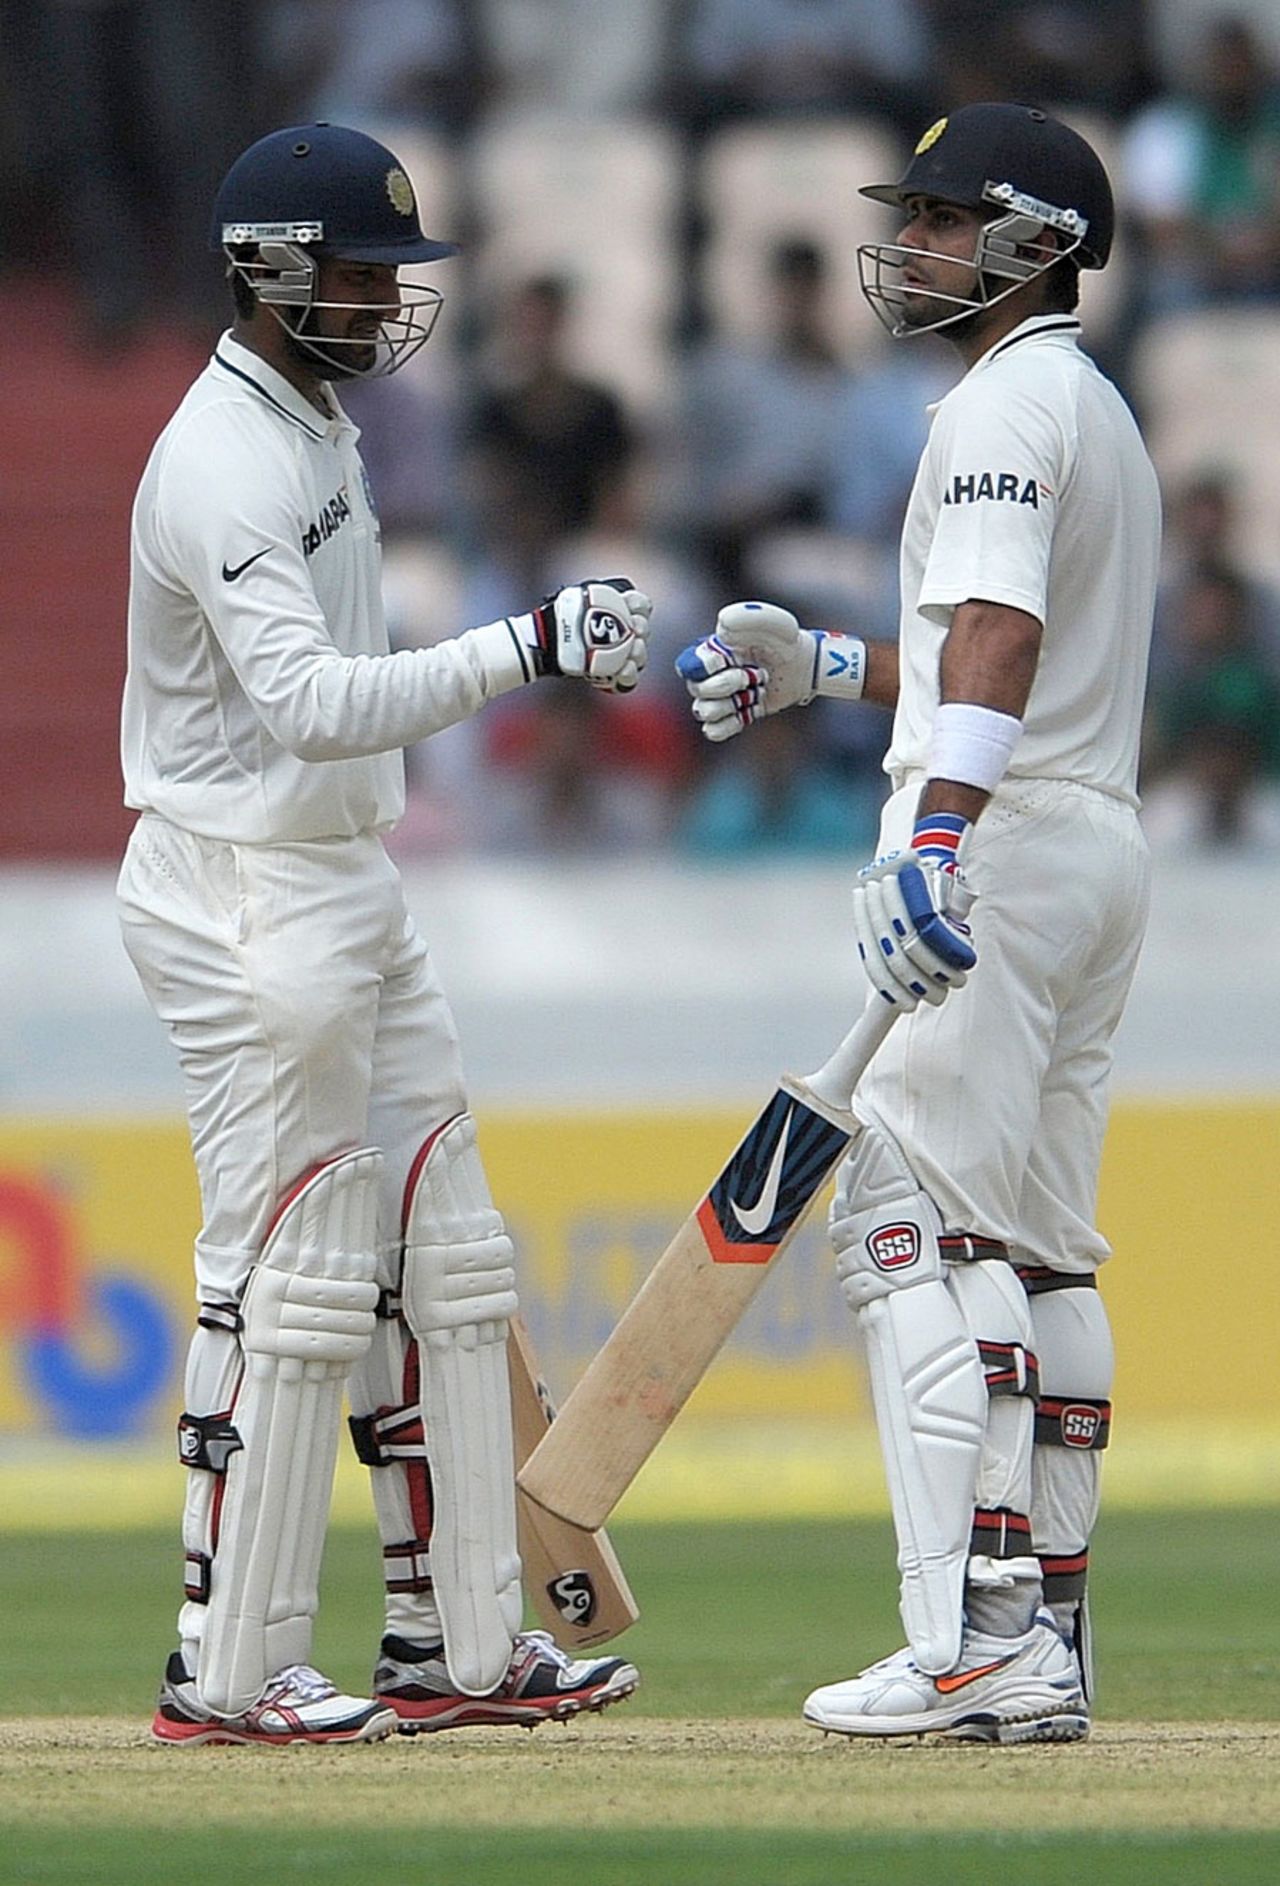 Cheteshwar Pujara and Virat Kohli were involved in a century stand, India v New Zealand, 1st Test, Hyderabad, 1st day, August 23, 2012